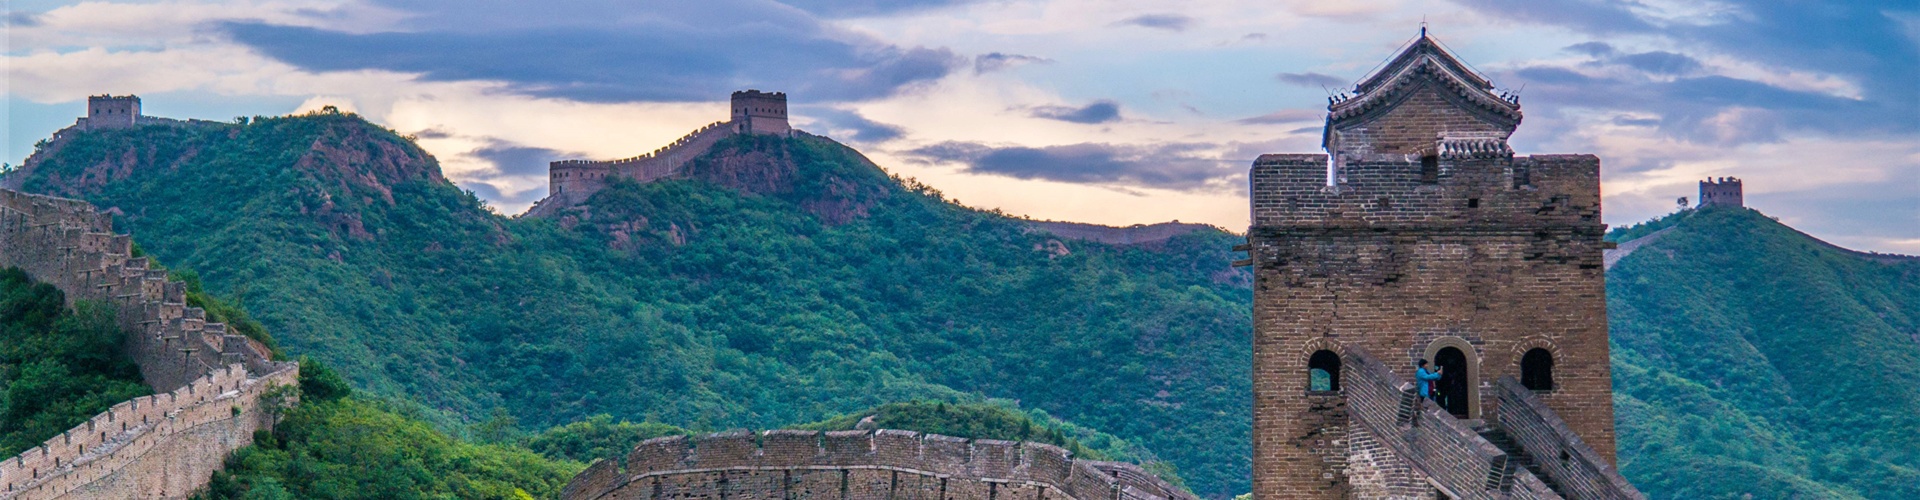 Simatai Great Wall - Trippest Travel Guide and Mini Group Tours